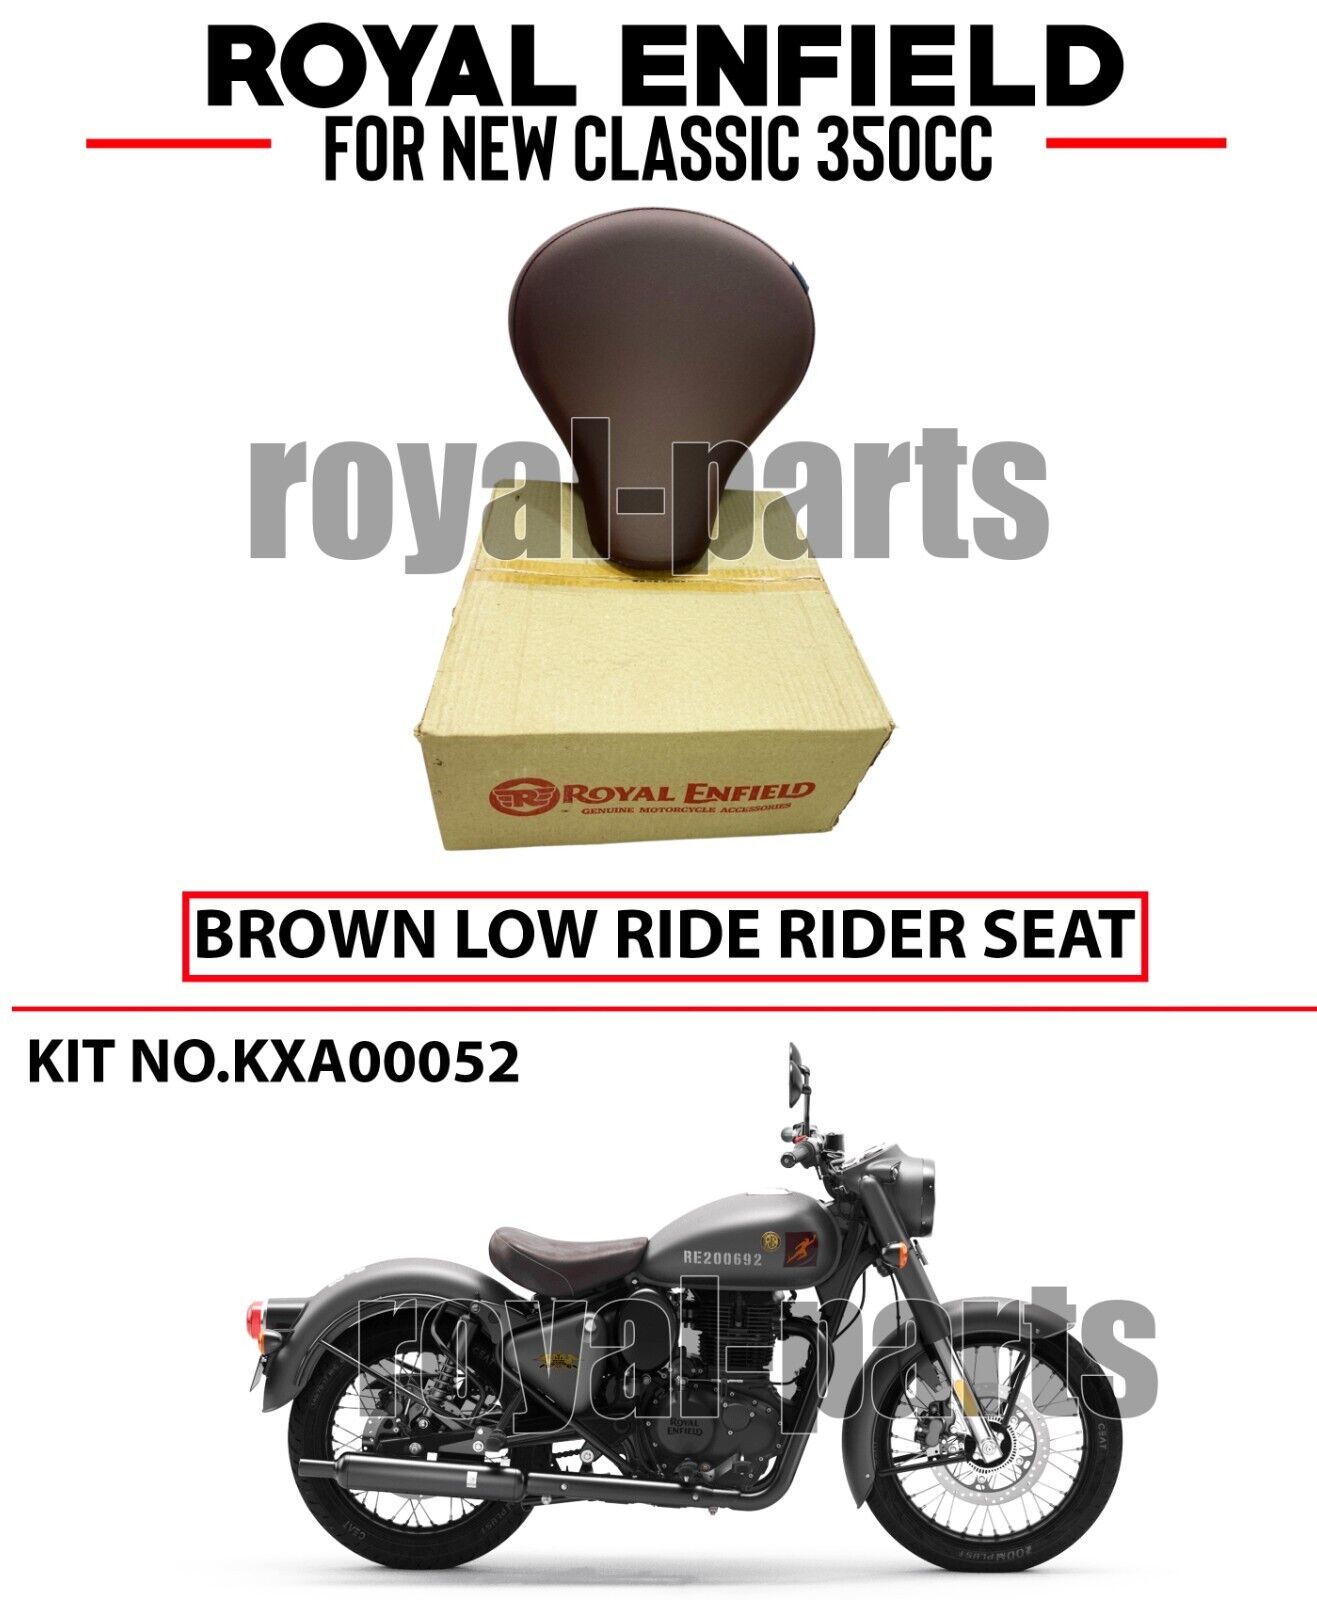 Royal Enfield \'\'BROWN LOW RIDE RIDER SEAT\'\' For NEW CLASSIC REBORN 350cc.